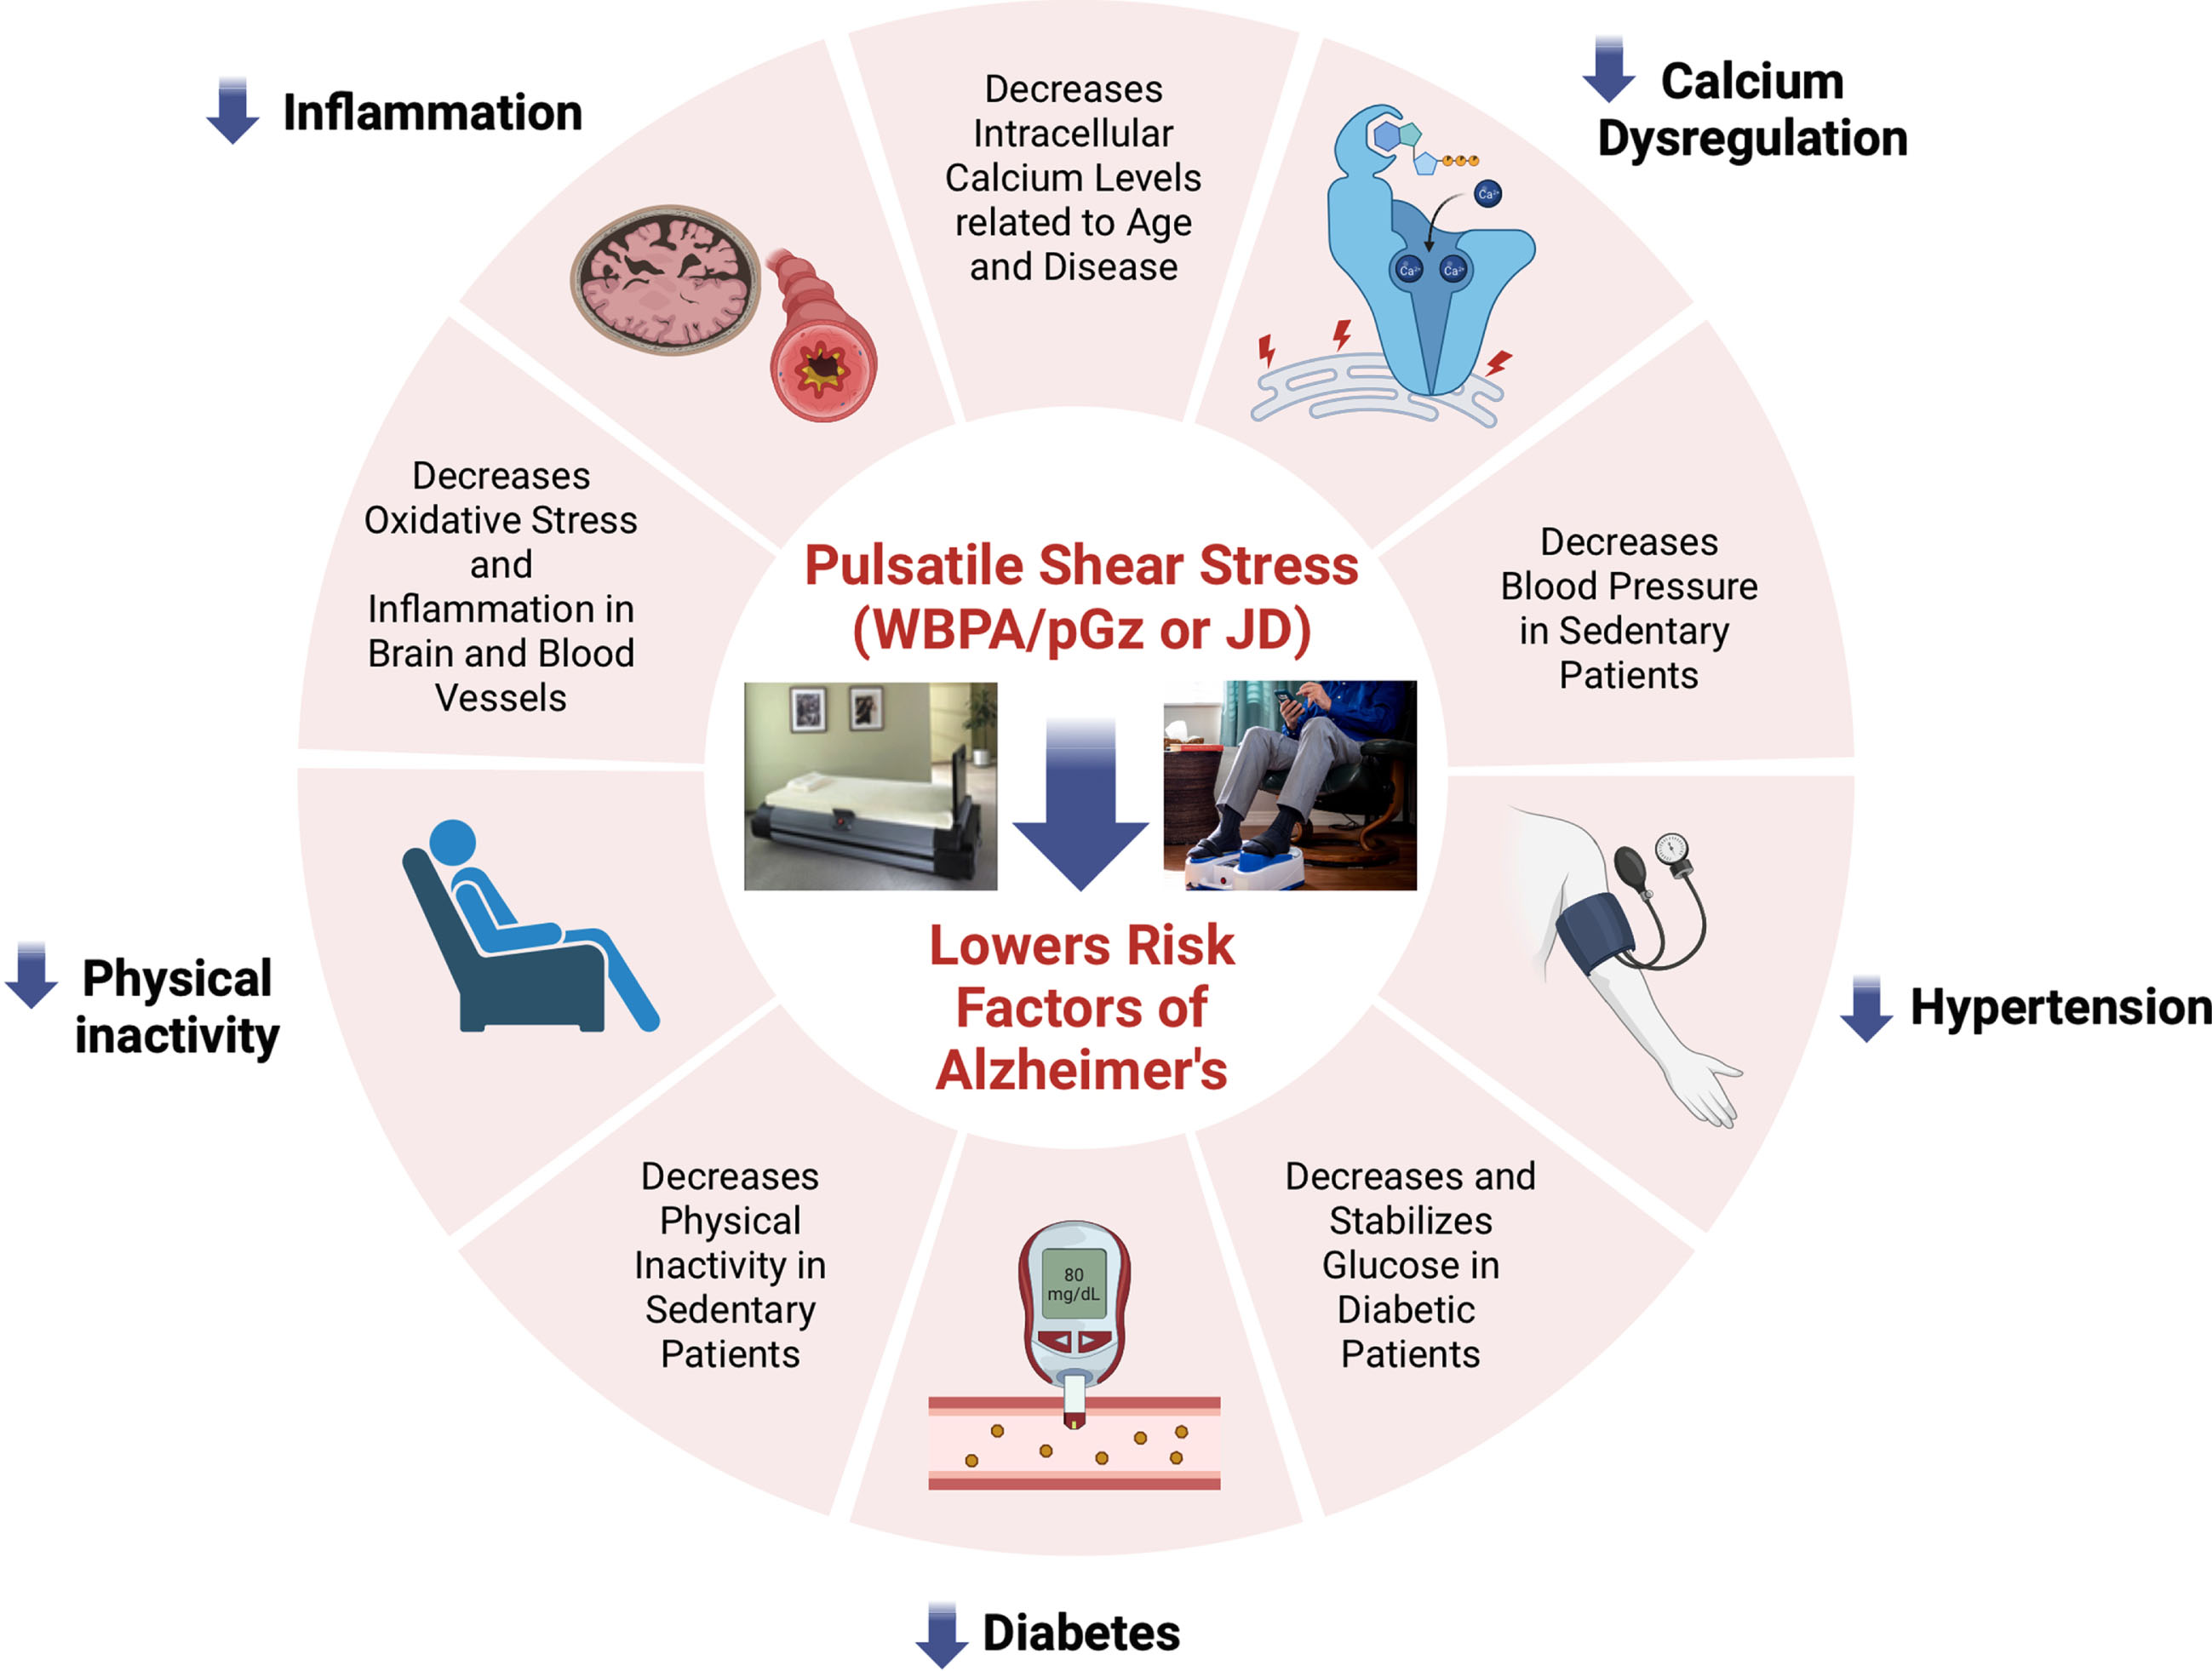 Overview of the published effects of Passive Pulsatile Shear Stress. The figure shows the effects of PPSS produced by whole body periodic acceleration (WBPA/pGz) and Jogging Device (JD) on the modifiable risk factors and other pathophysiological mechanisms involved in AD.